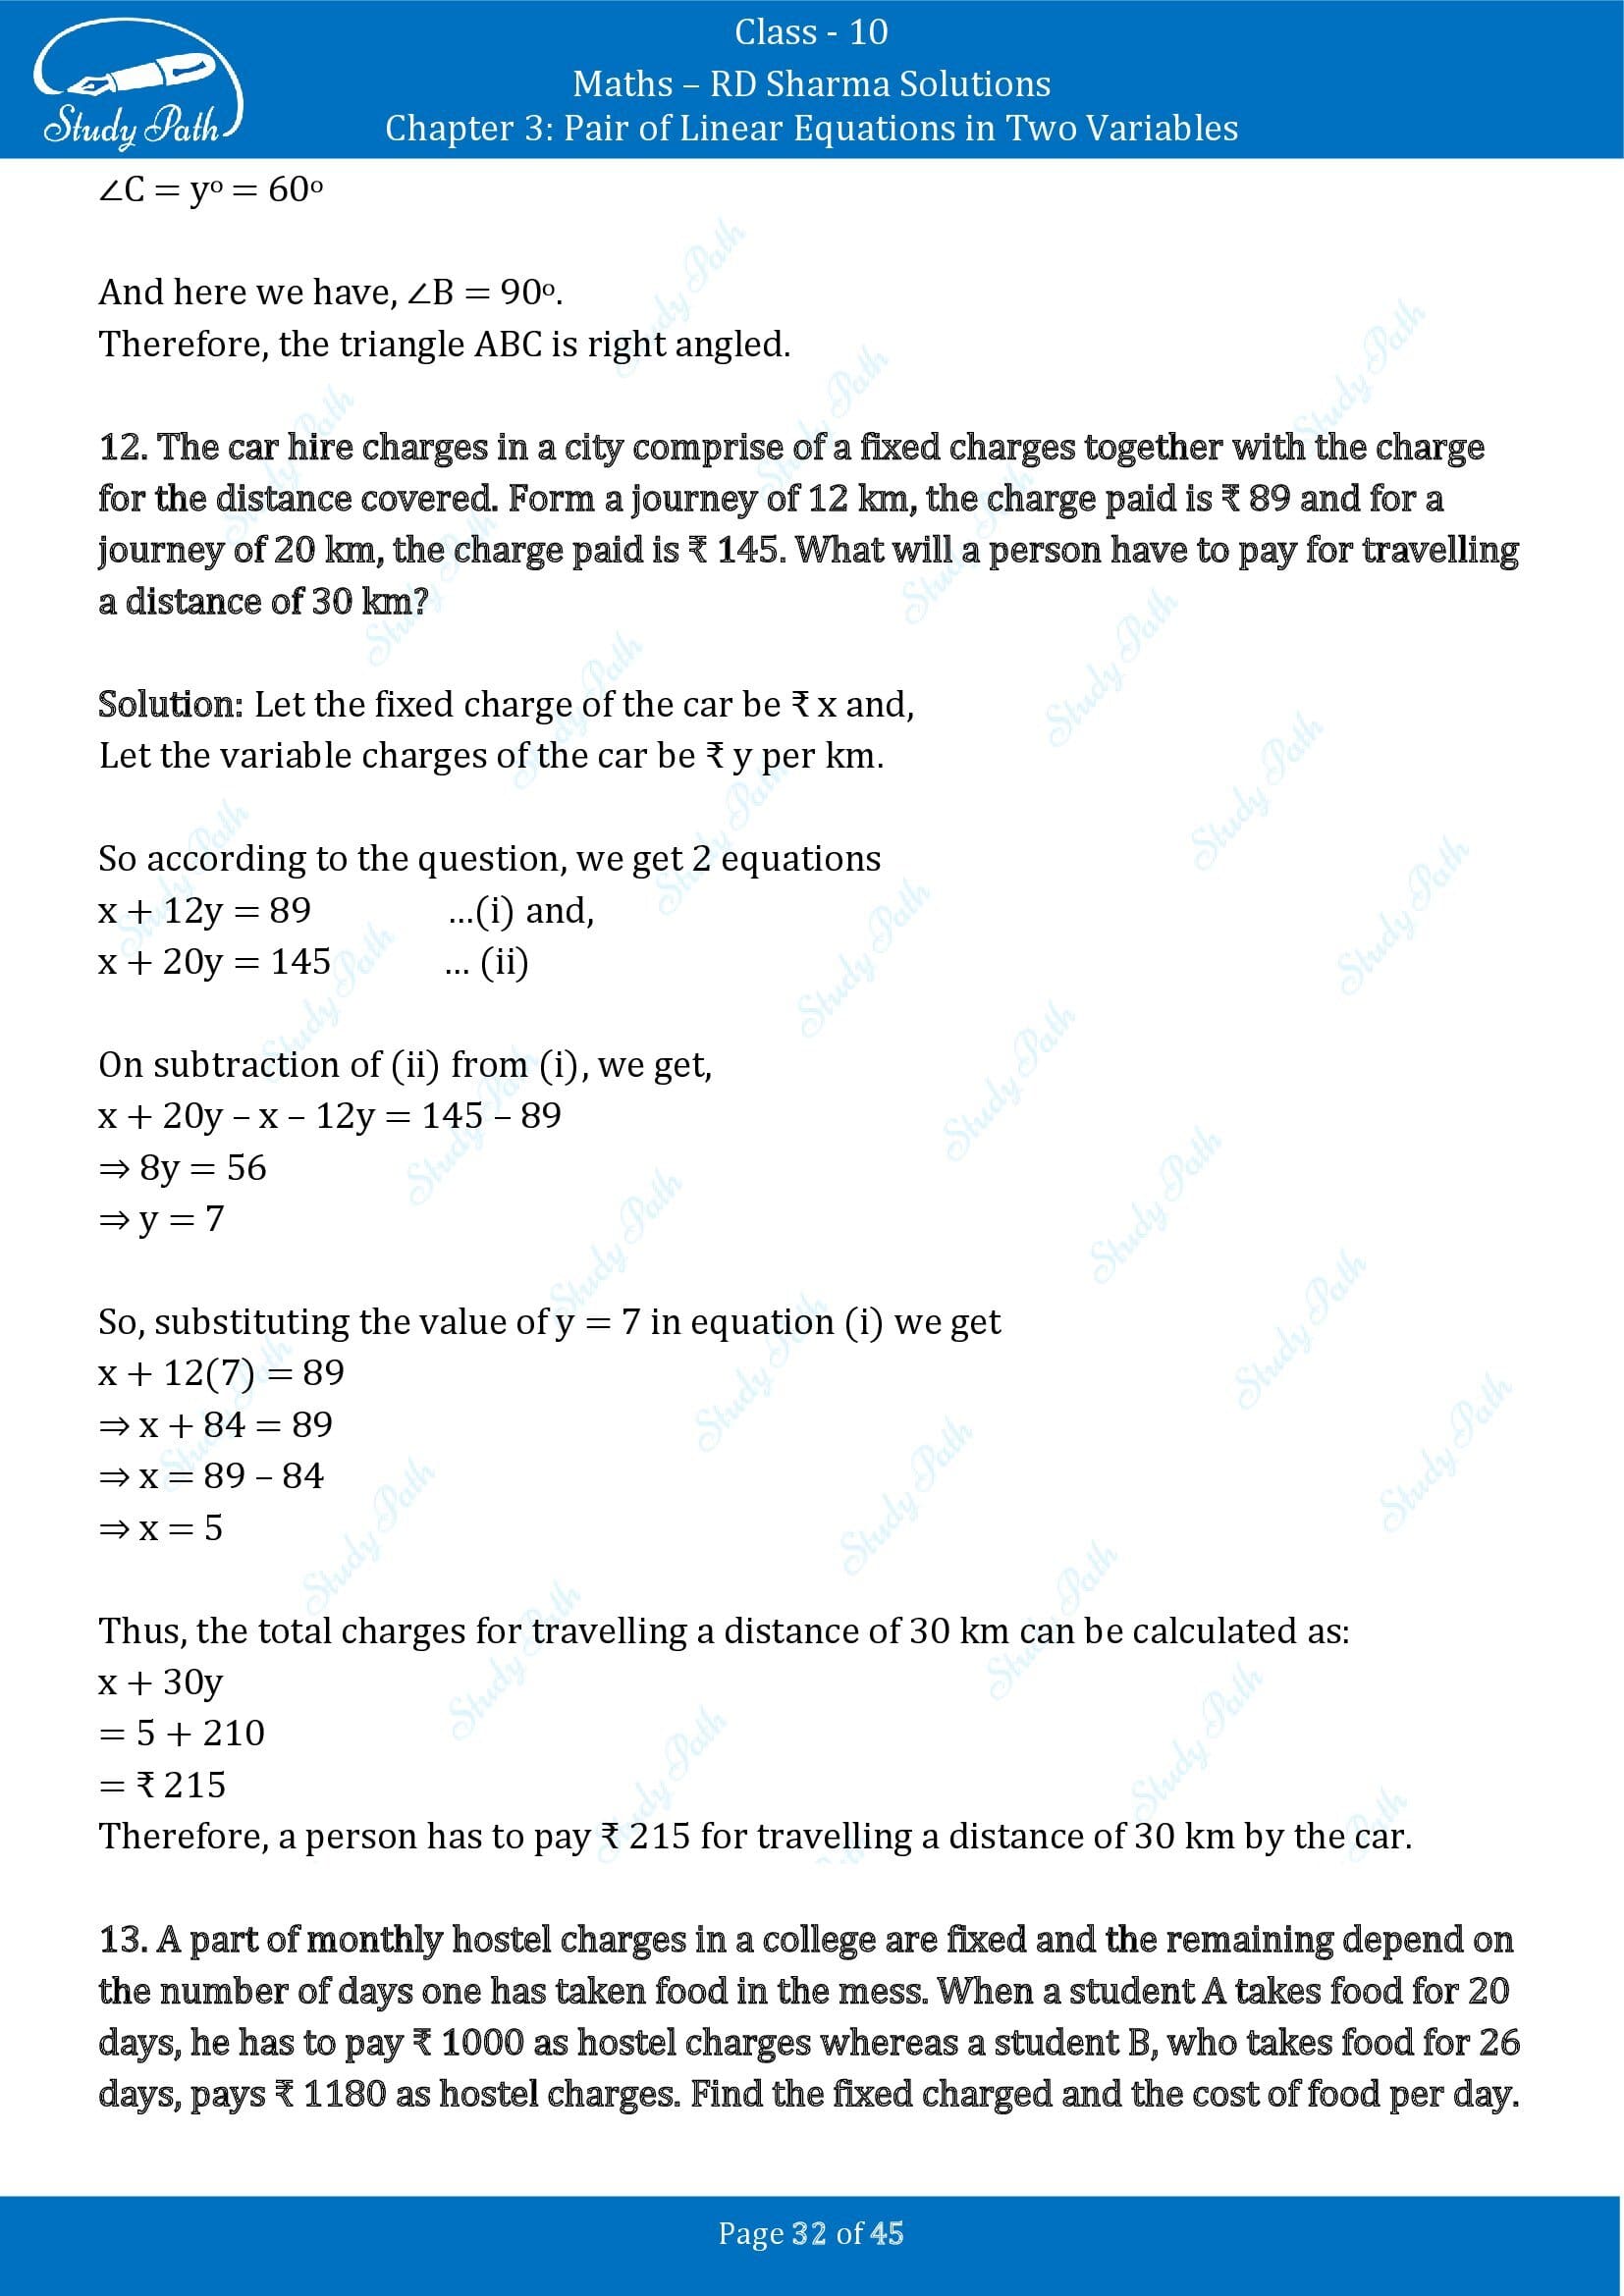 RD Sharma Solutions Class 10 Chapter 3 Pair of Linear Equations in Two Variables Exercise 3.11 00032